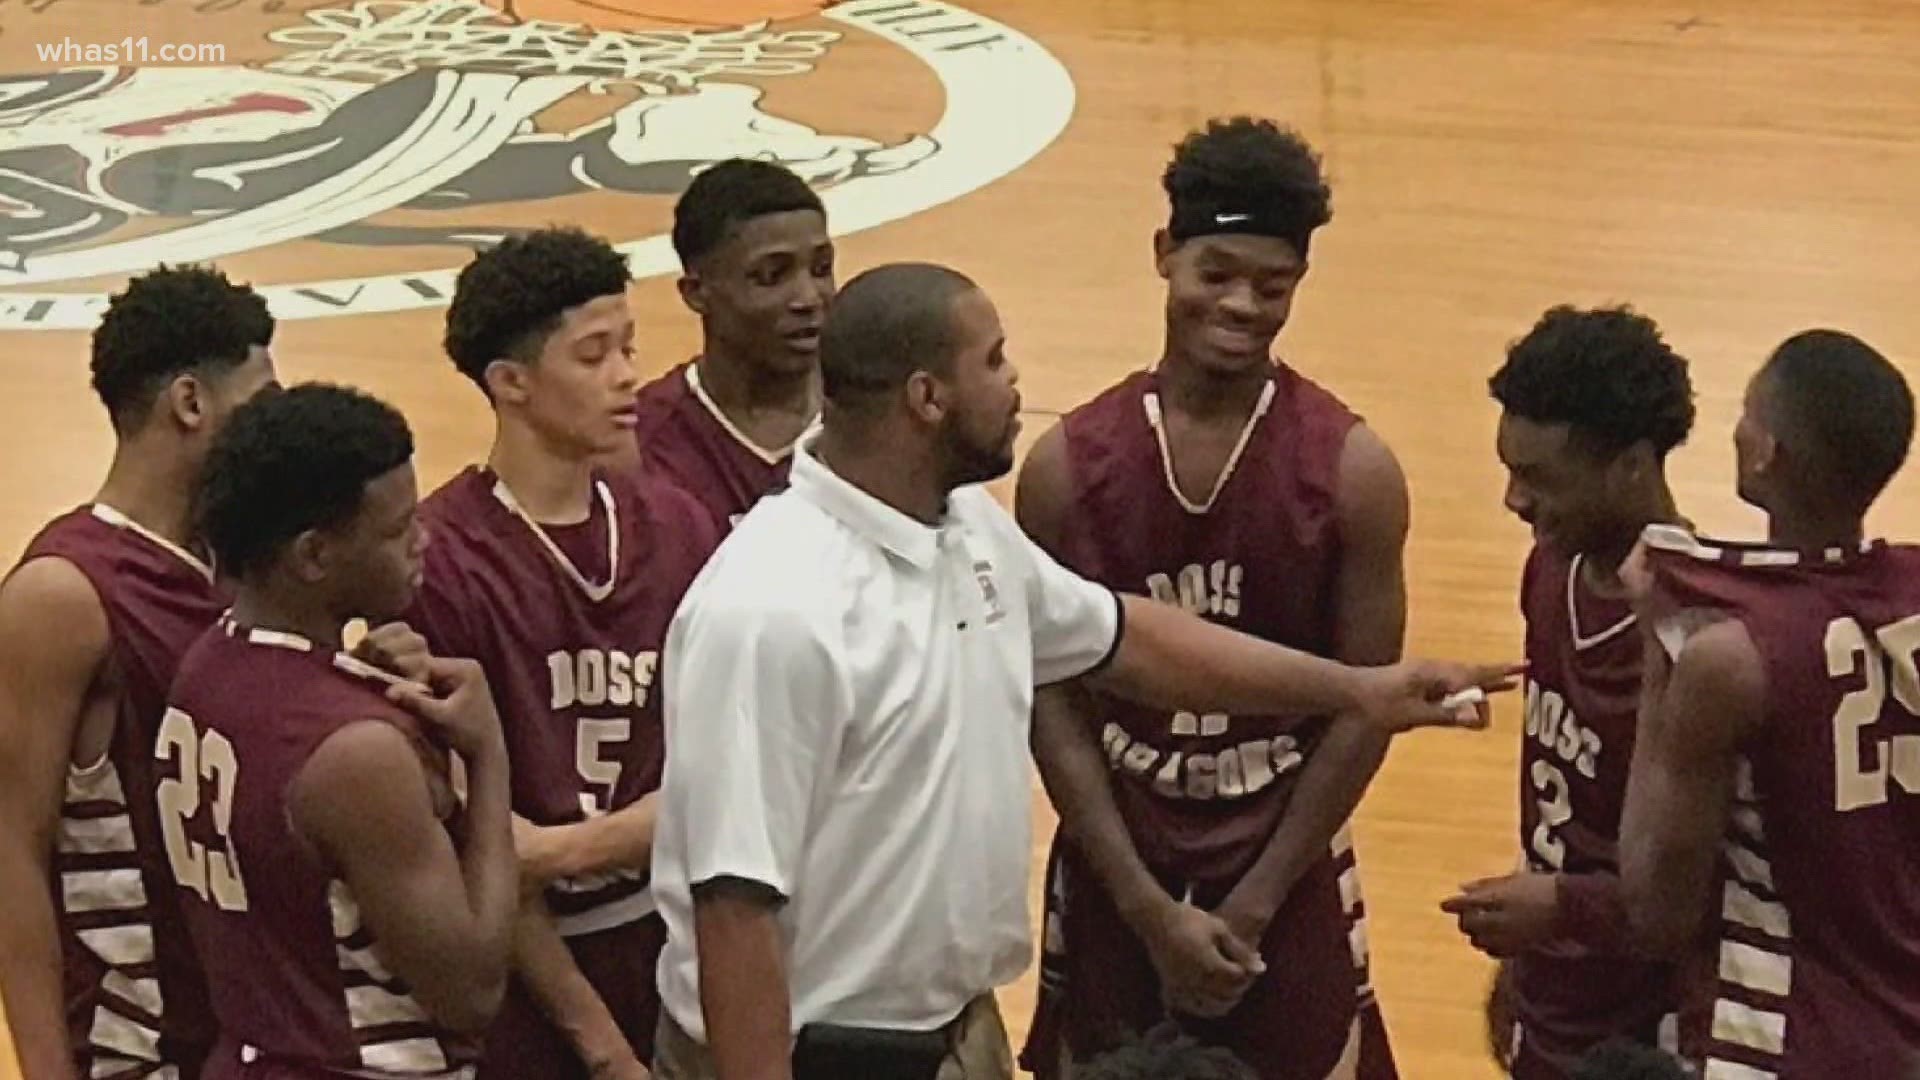 Eric Davie was an assistant basketball coach at Doss High School but for most students, he was a mentor and role model.